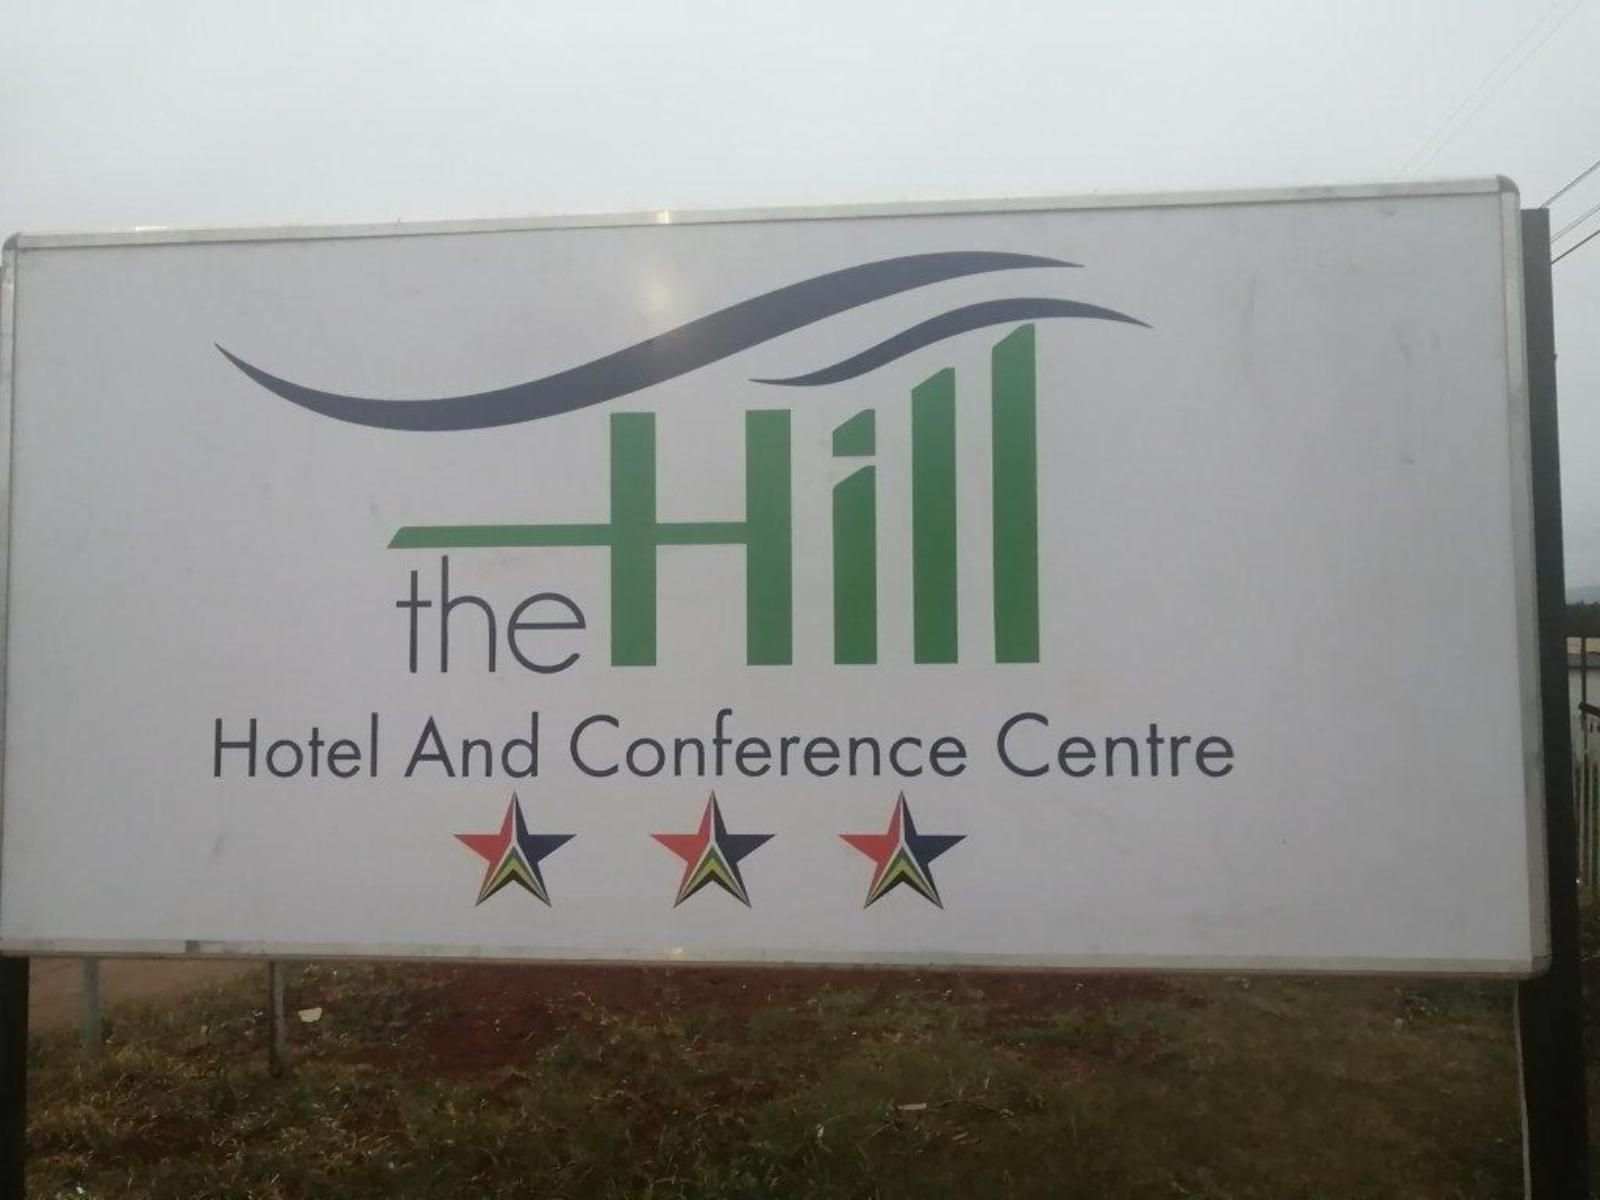 The Hill Hotel And Conference Centre Thohoyandou Limpopo Province South Africa Text, Window, Architecture